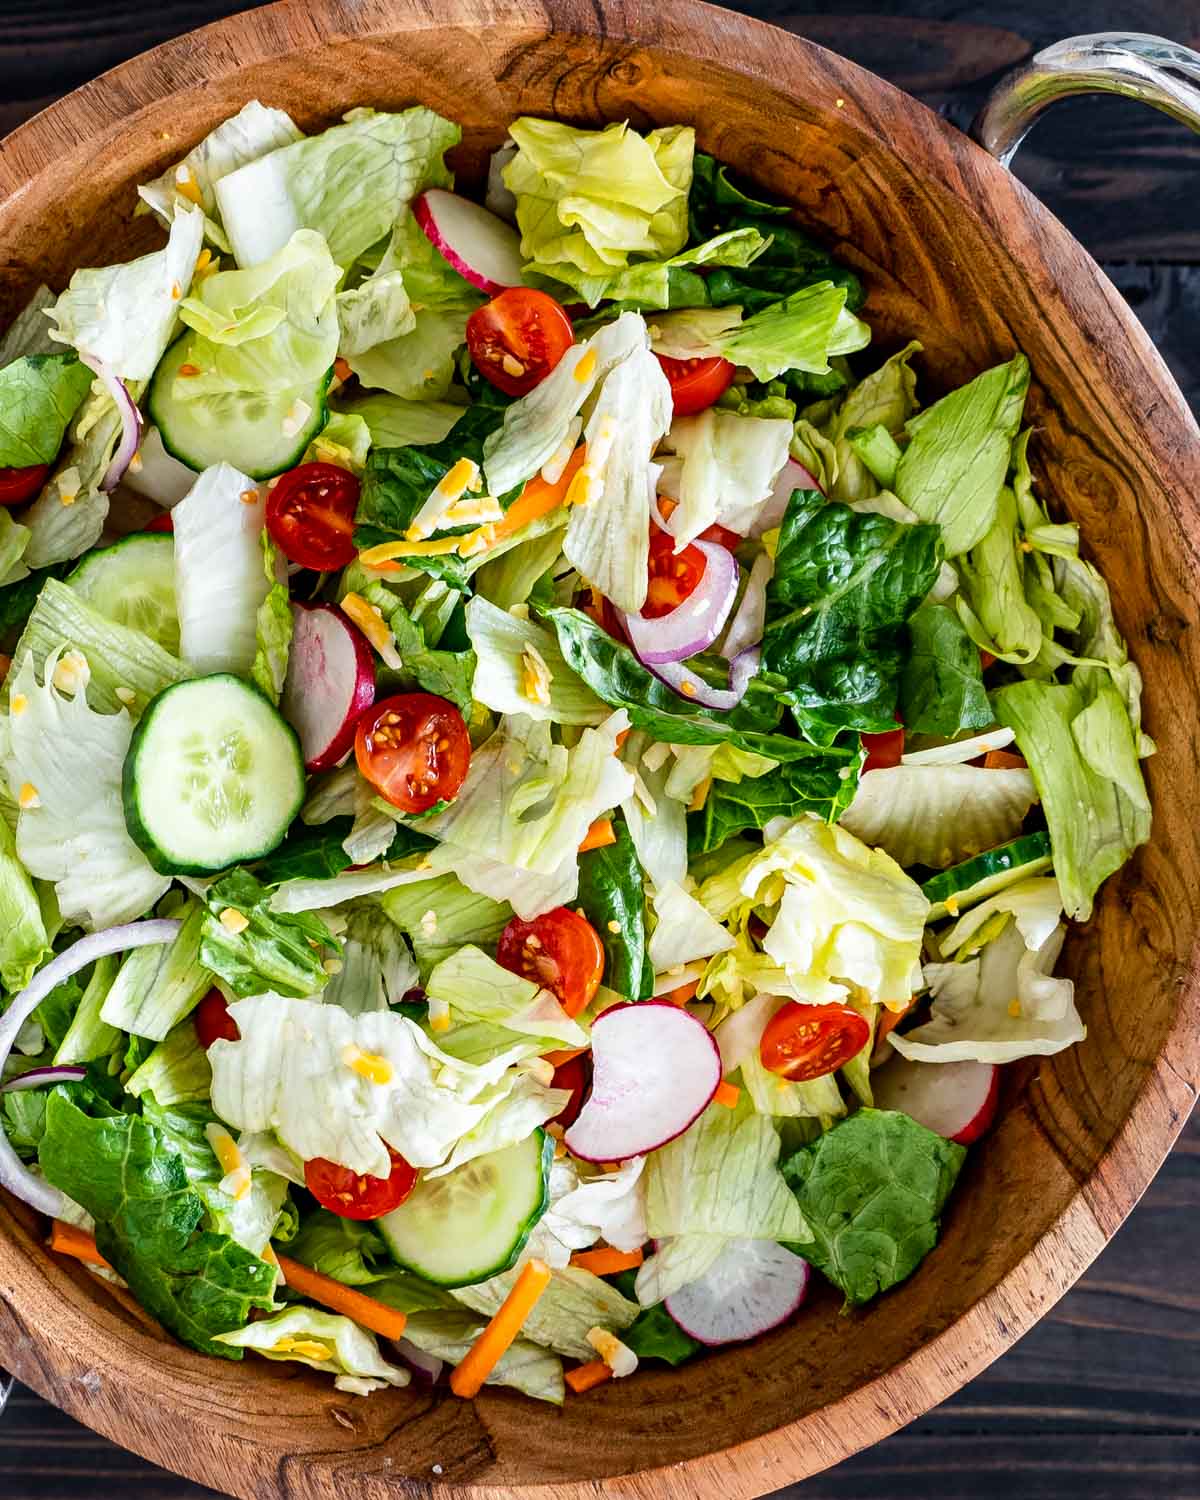 berlize groenewald recommends what does toss your salad mean pic